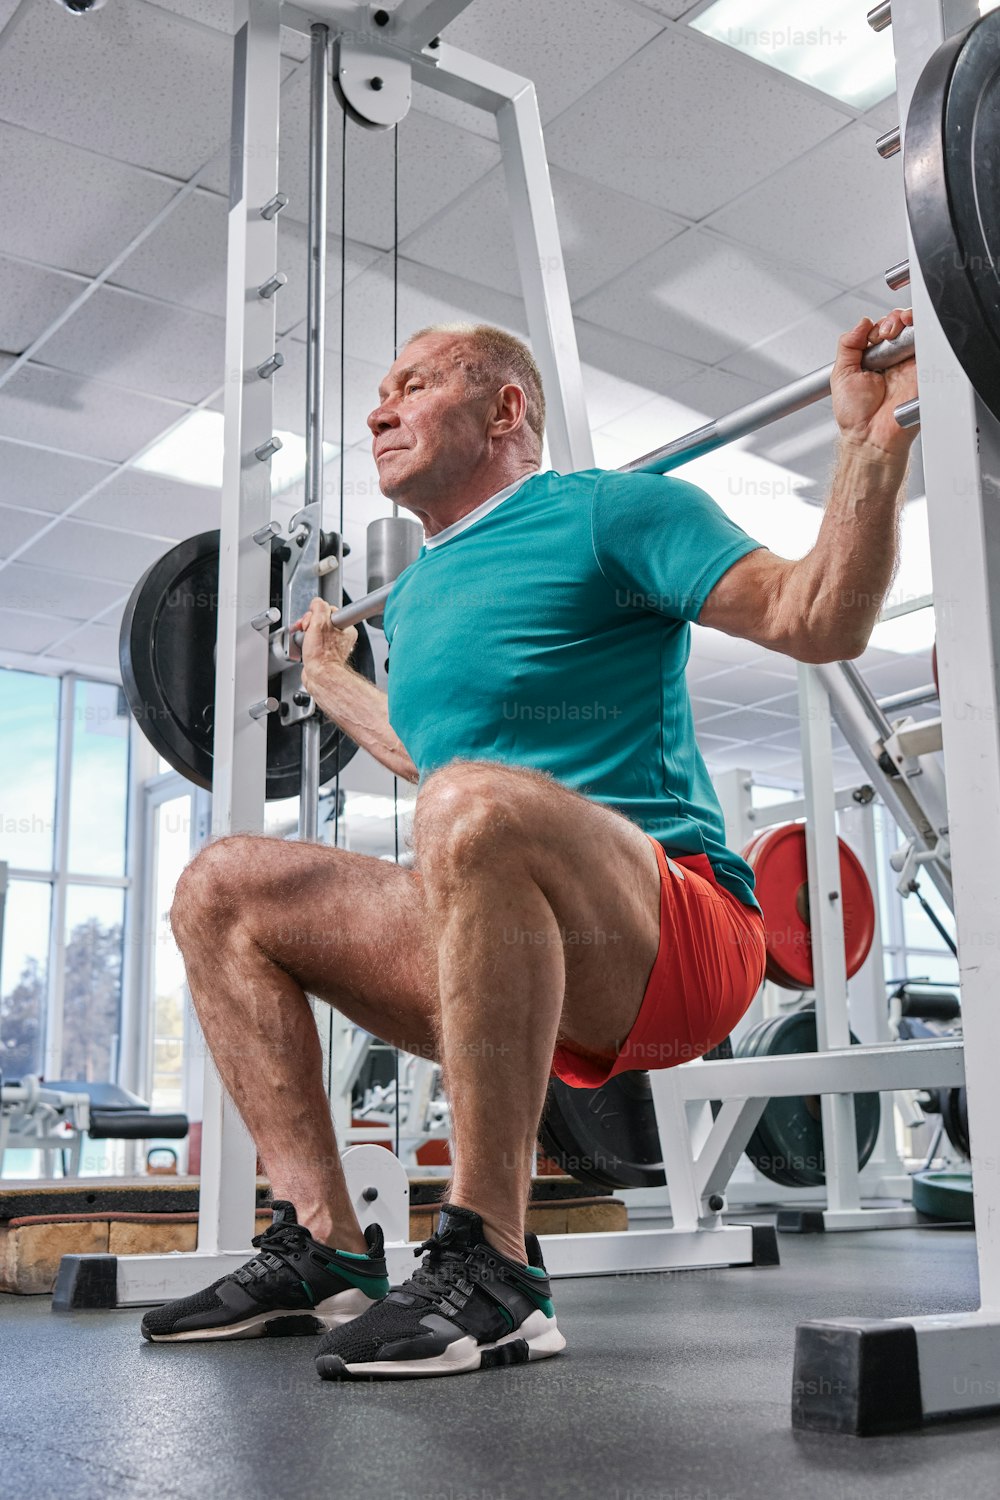 a man squats on a bench in a gym